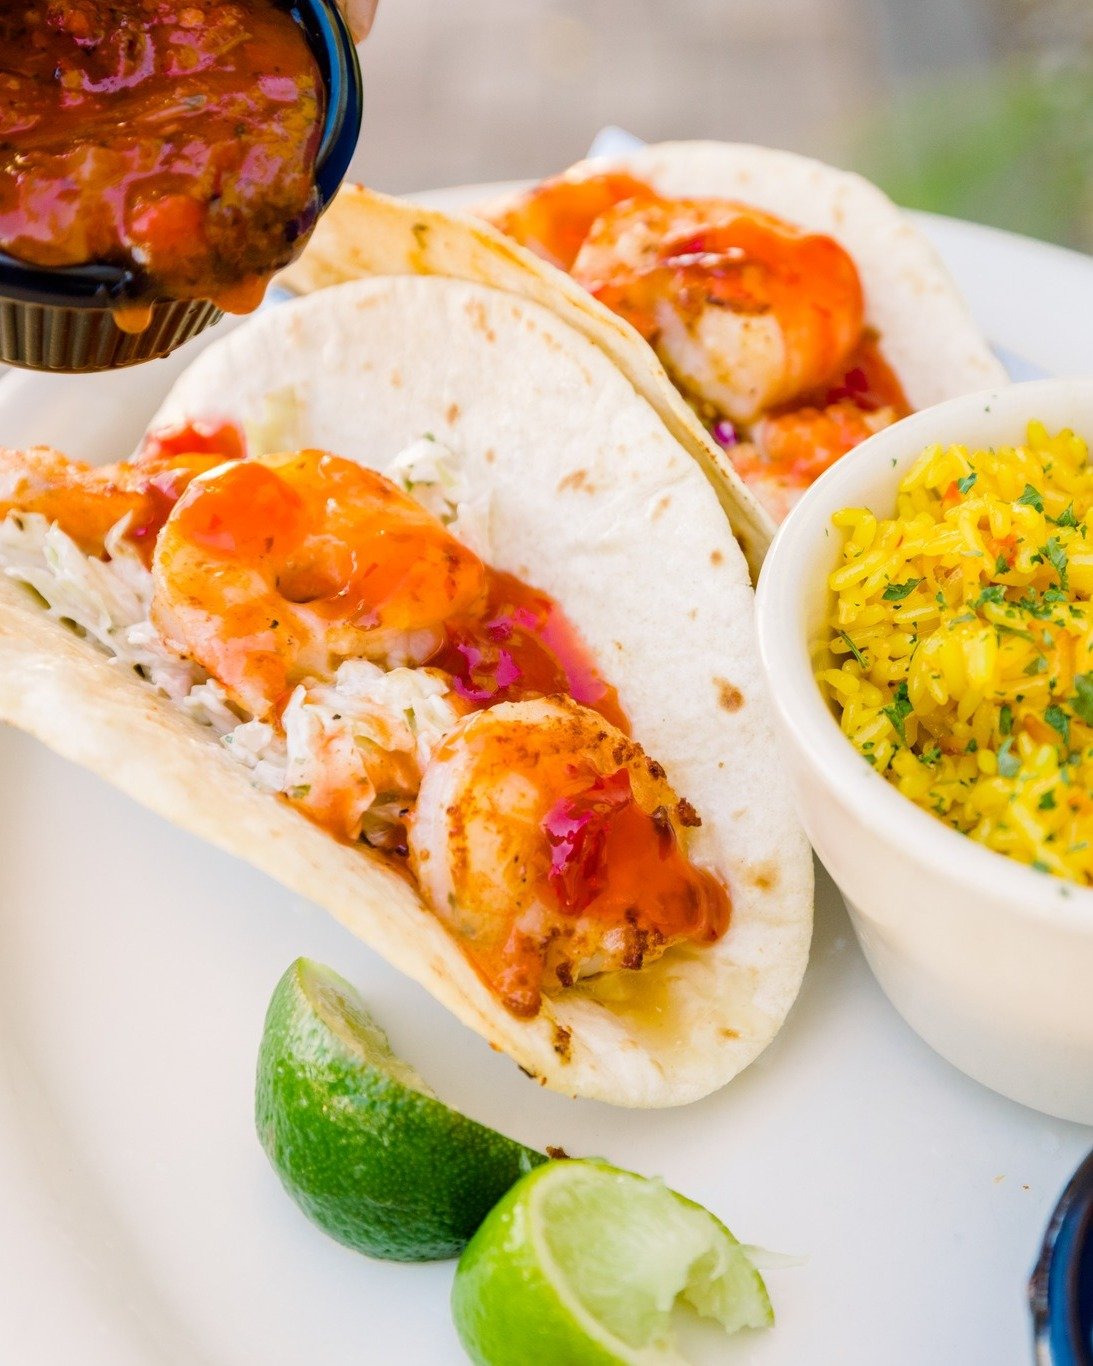 Taco 'bout a good time! Join us this Cinco de Mayo for mouthwatering tacos with a coastal twist! 🌮
.
.
.
#spacecoast #cocoabeach #cocoabeachdining #spacecoastfood #diningincocoabeach #capecanaveral #melbournefl #lovefl #florida #margaritas #goodfood